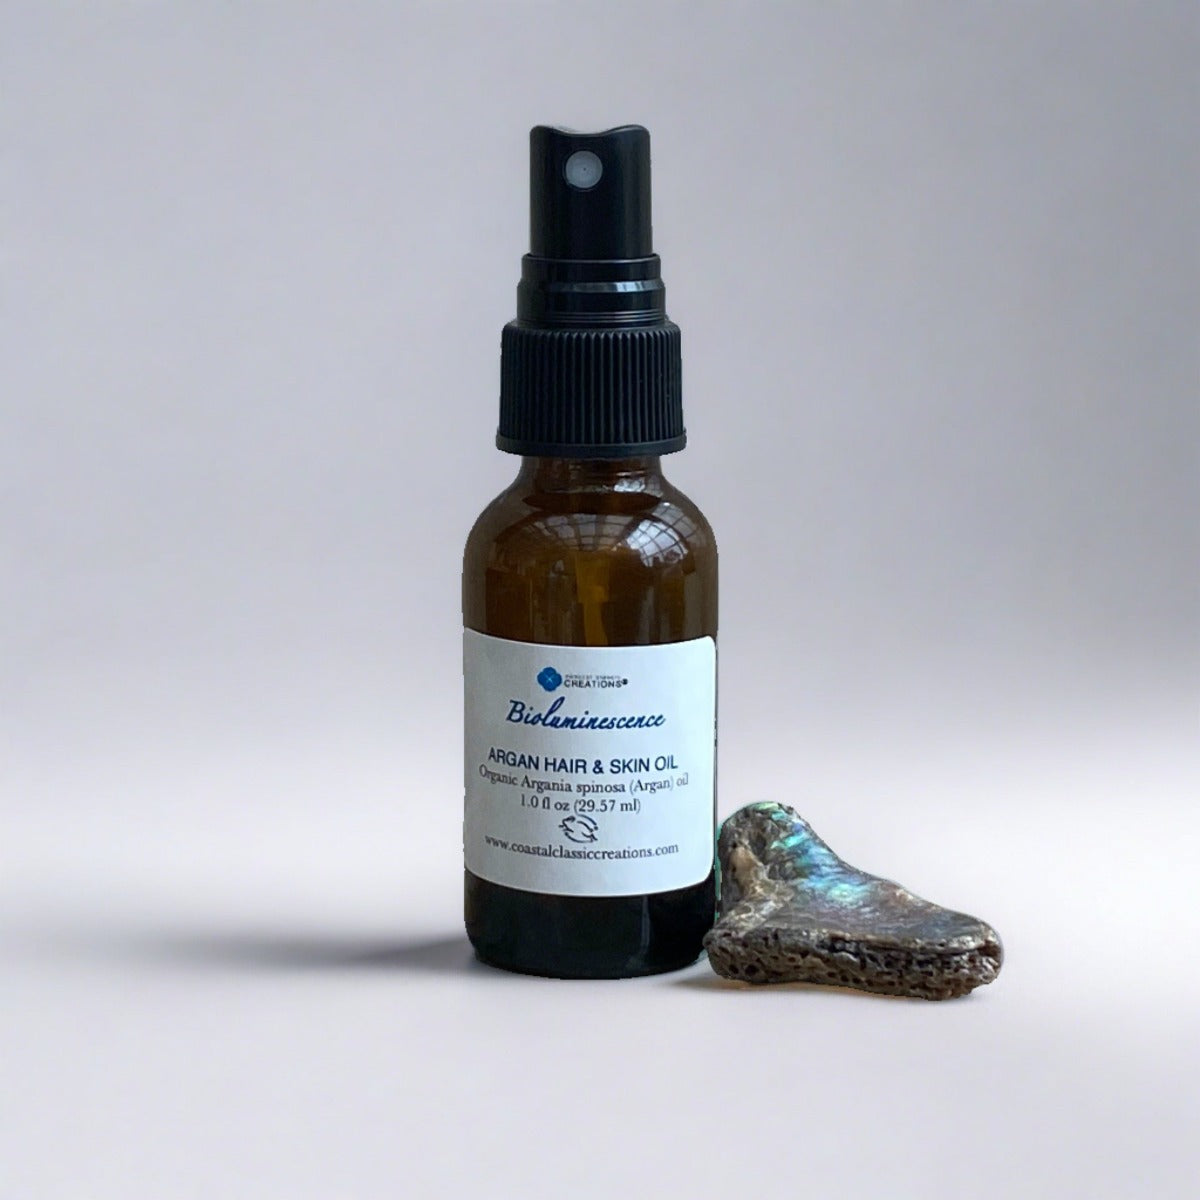 1-ounce bottle of argan oil with spray top and labeled with product name and ingredients